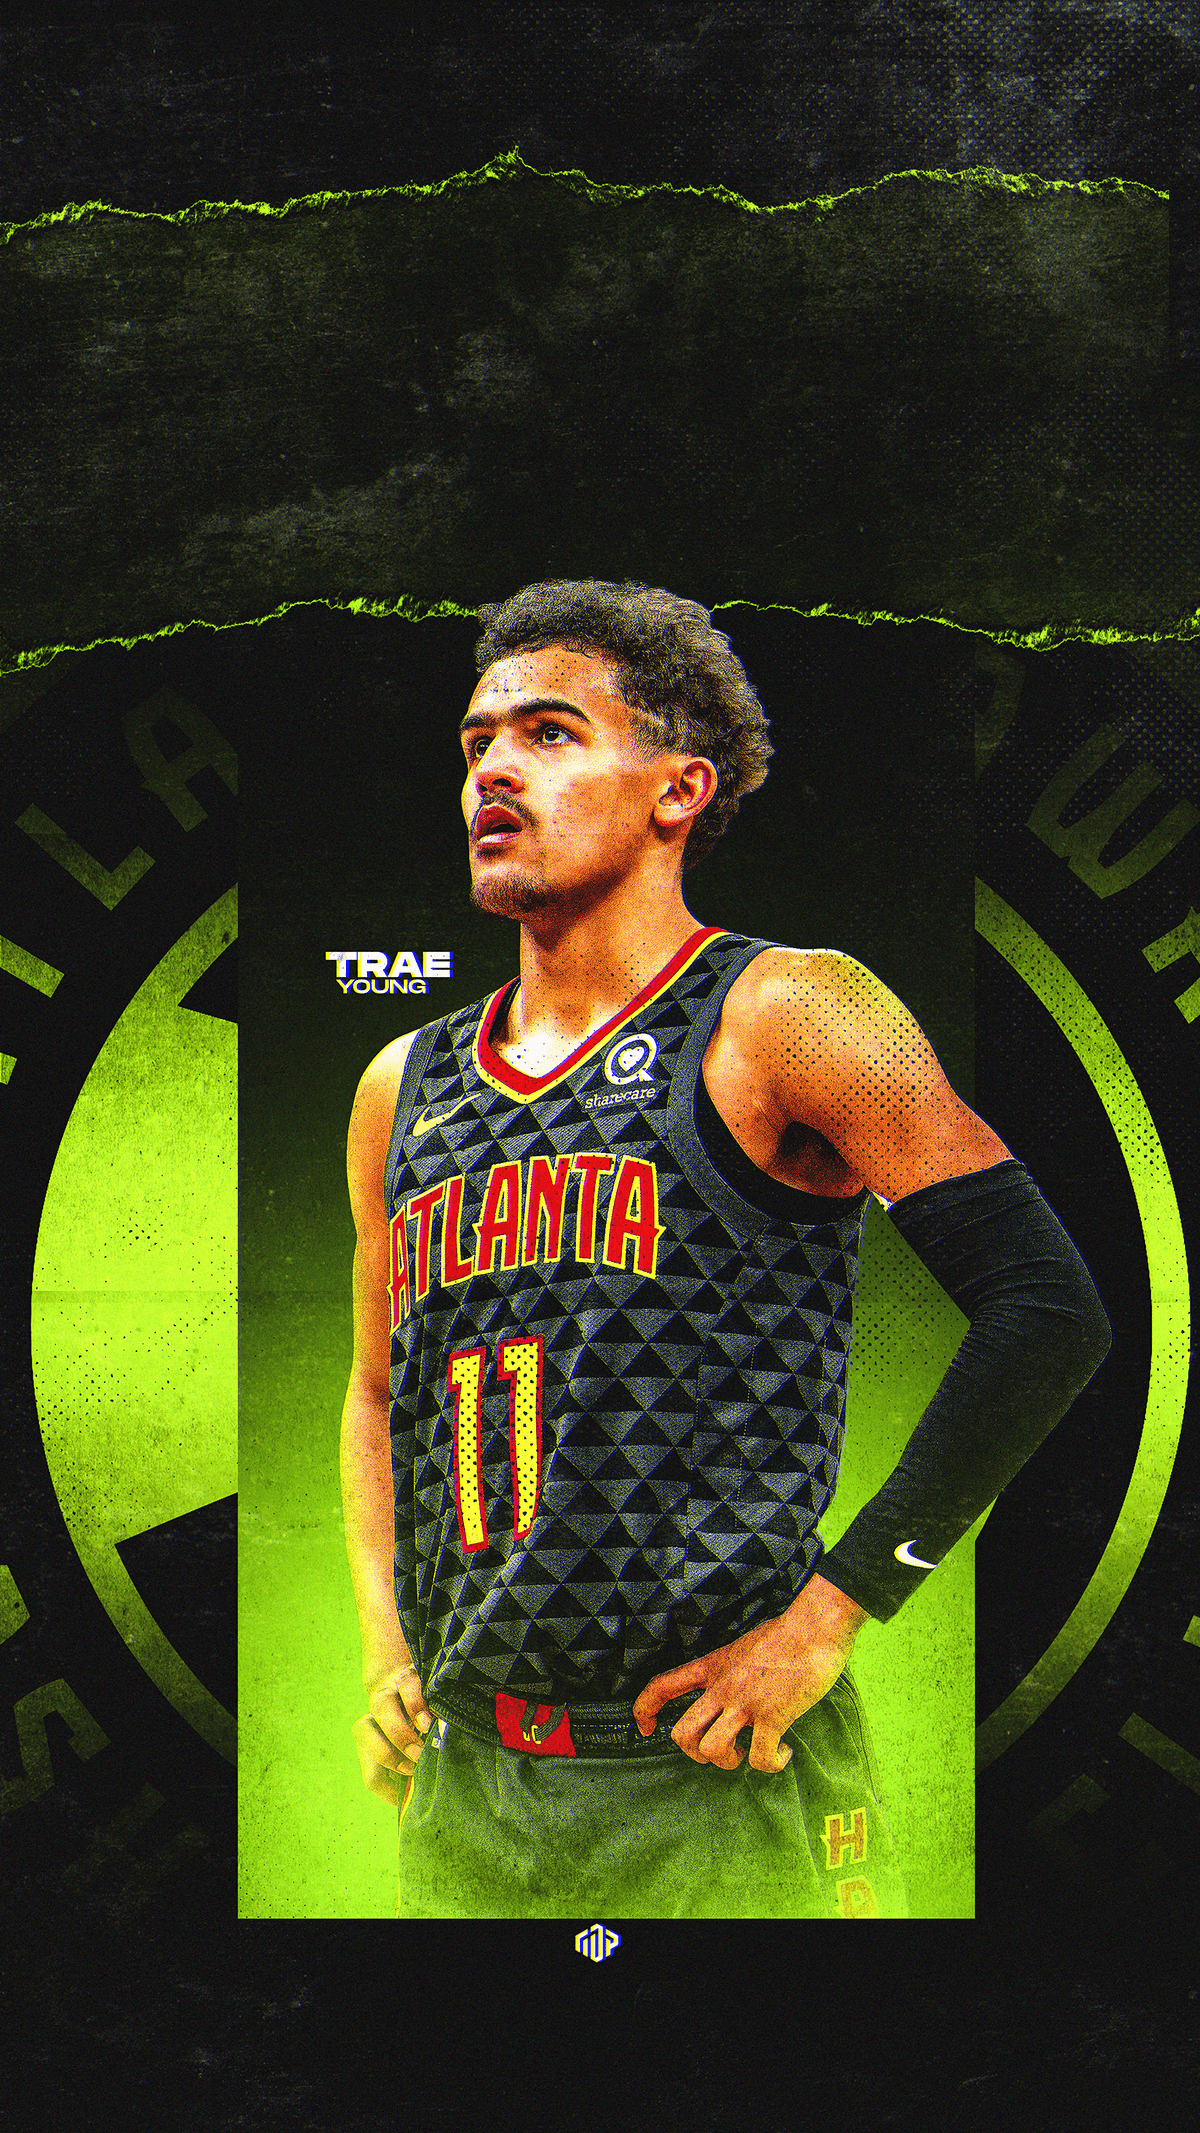 Trae Young Wallpaper Wednesday Graphic. Nba picture, Basketball players nba, Nba wallpaper